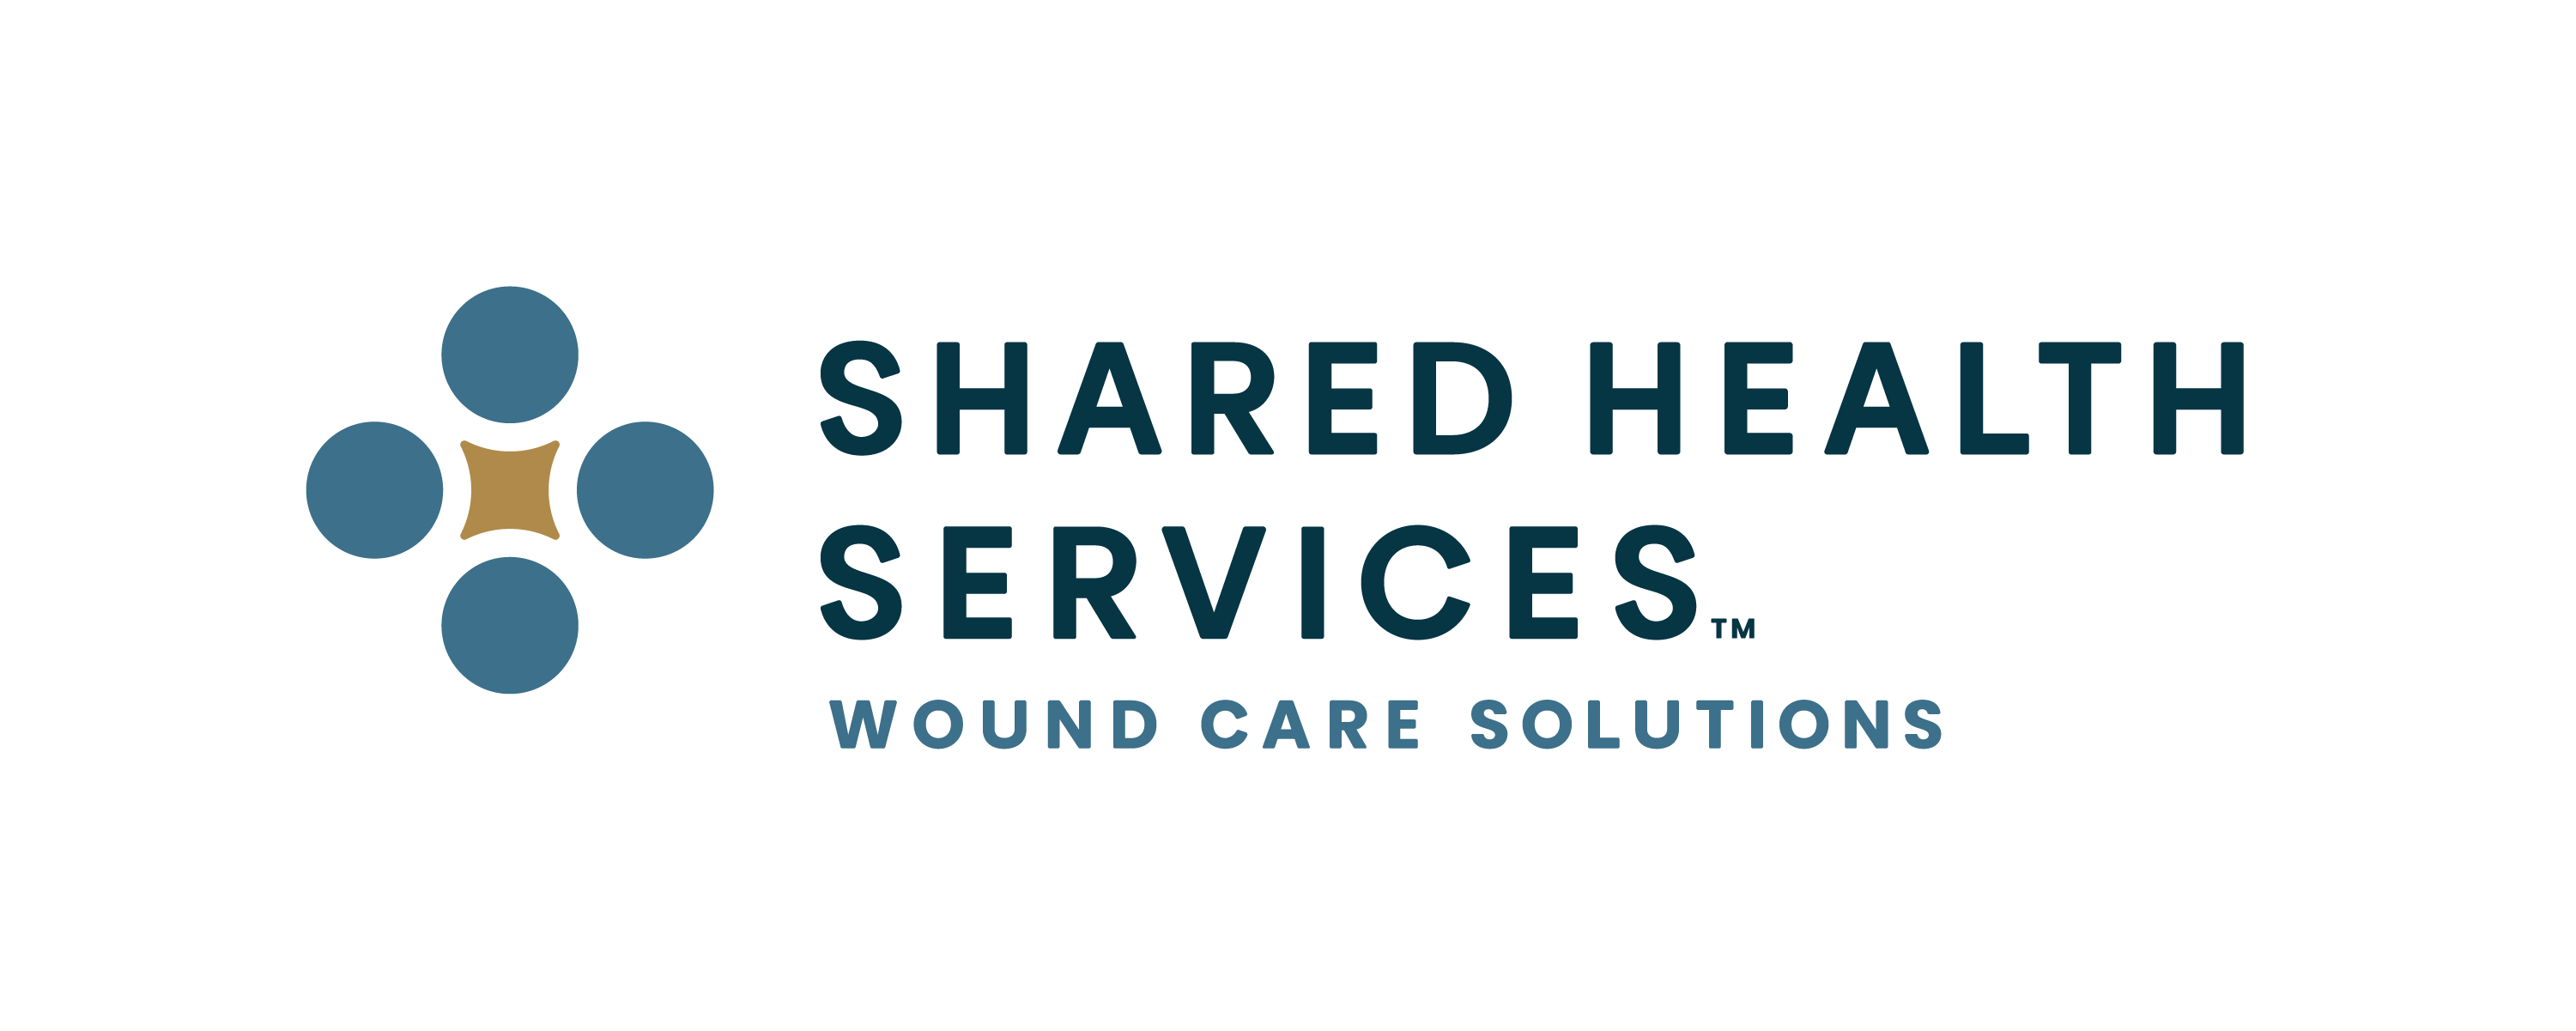 Shared Health Services to Rebrand Wound Care Offerings